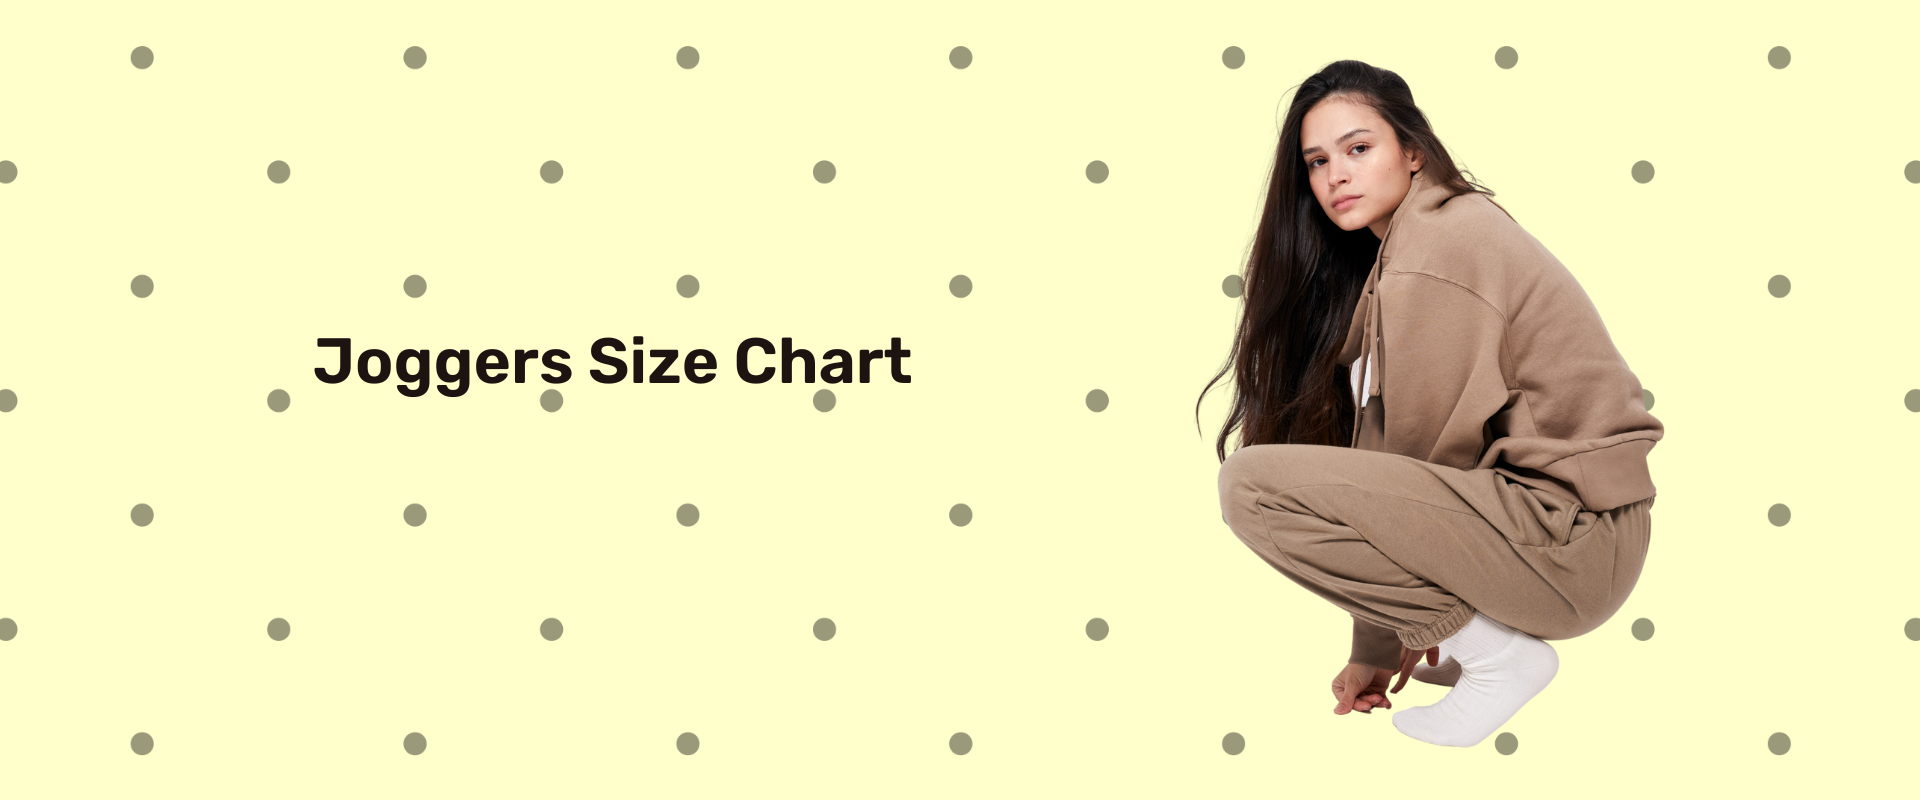 Guide to Joggers Size Chart to find Your Perfect Fit